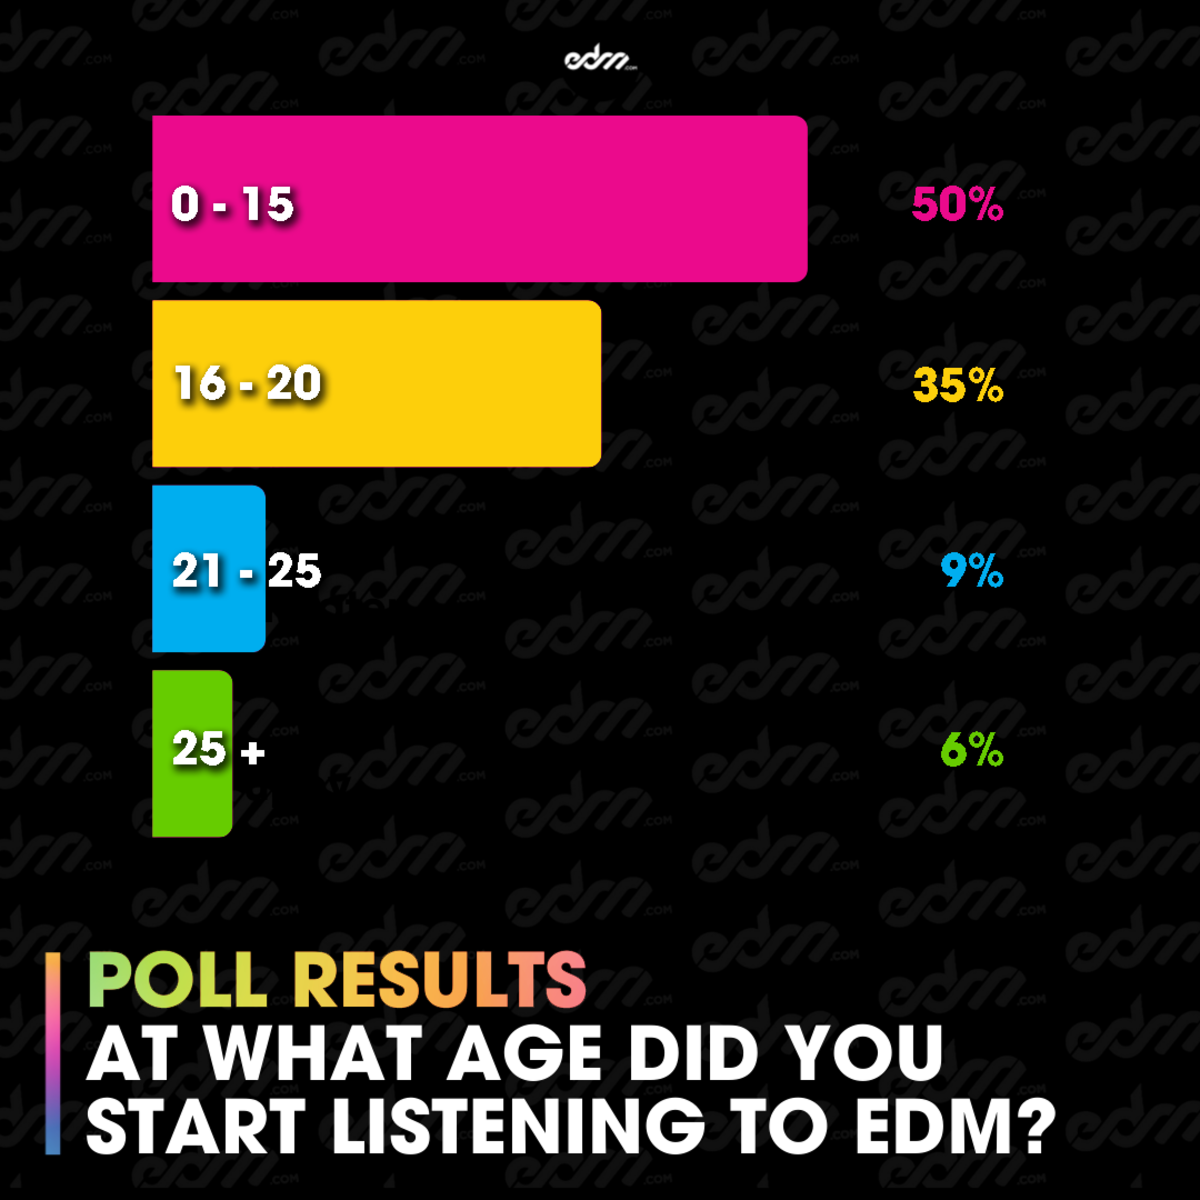 Our latest EDM.com poll found 85% of dance music fans began listening before the age of 20.